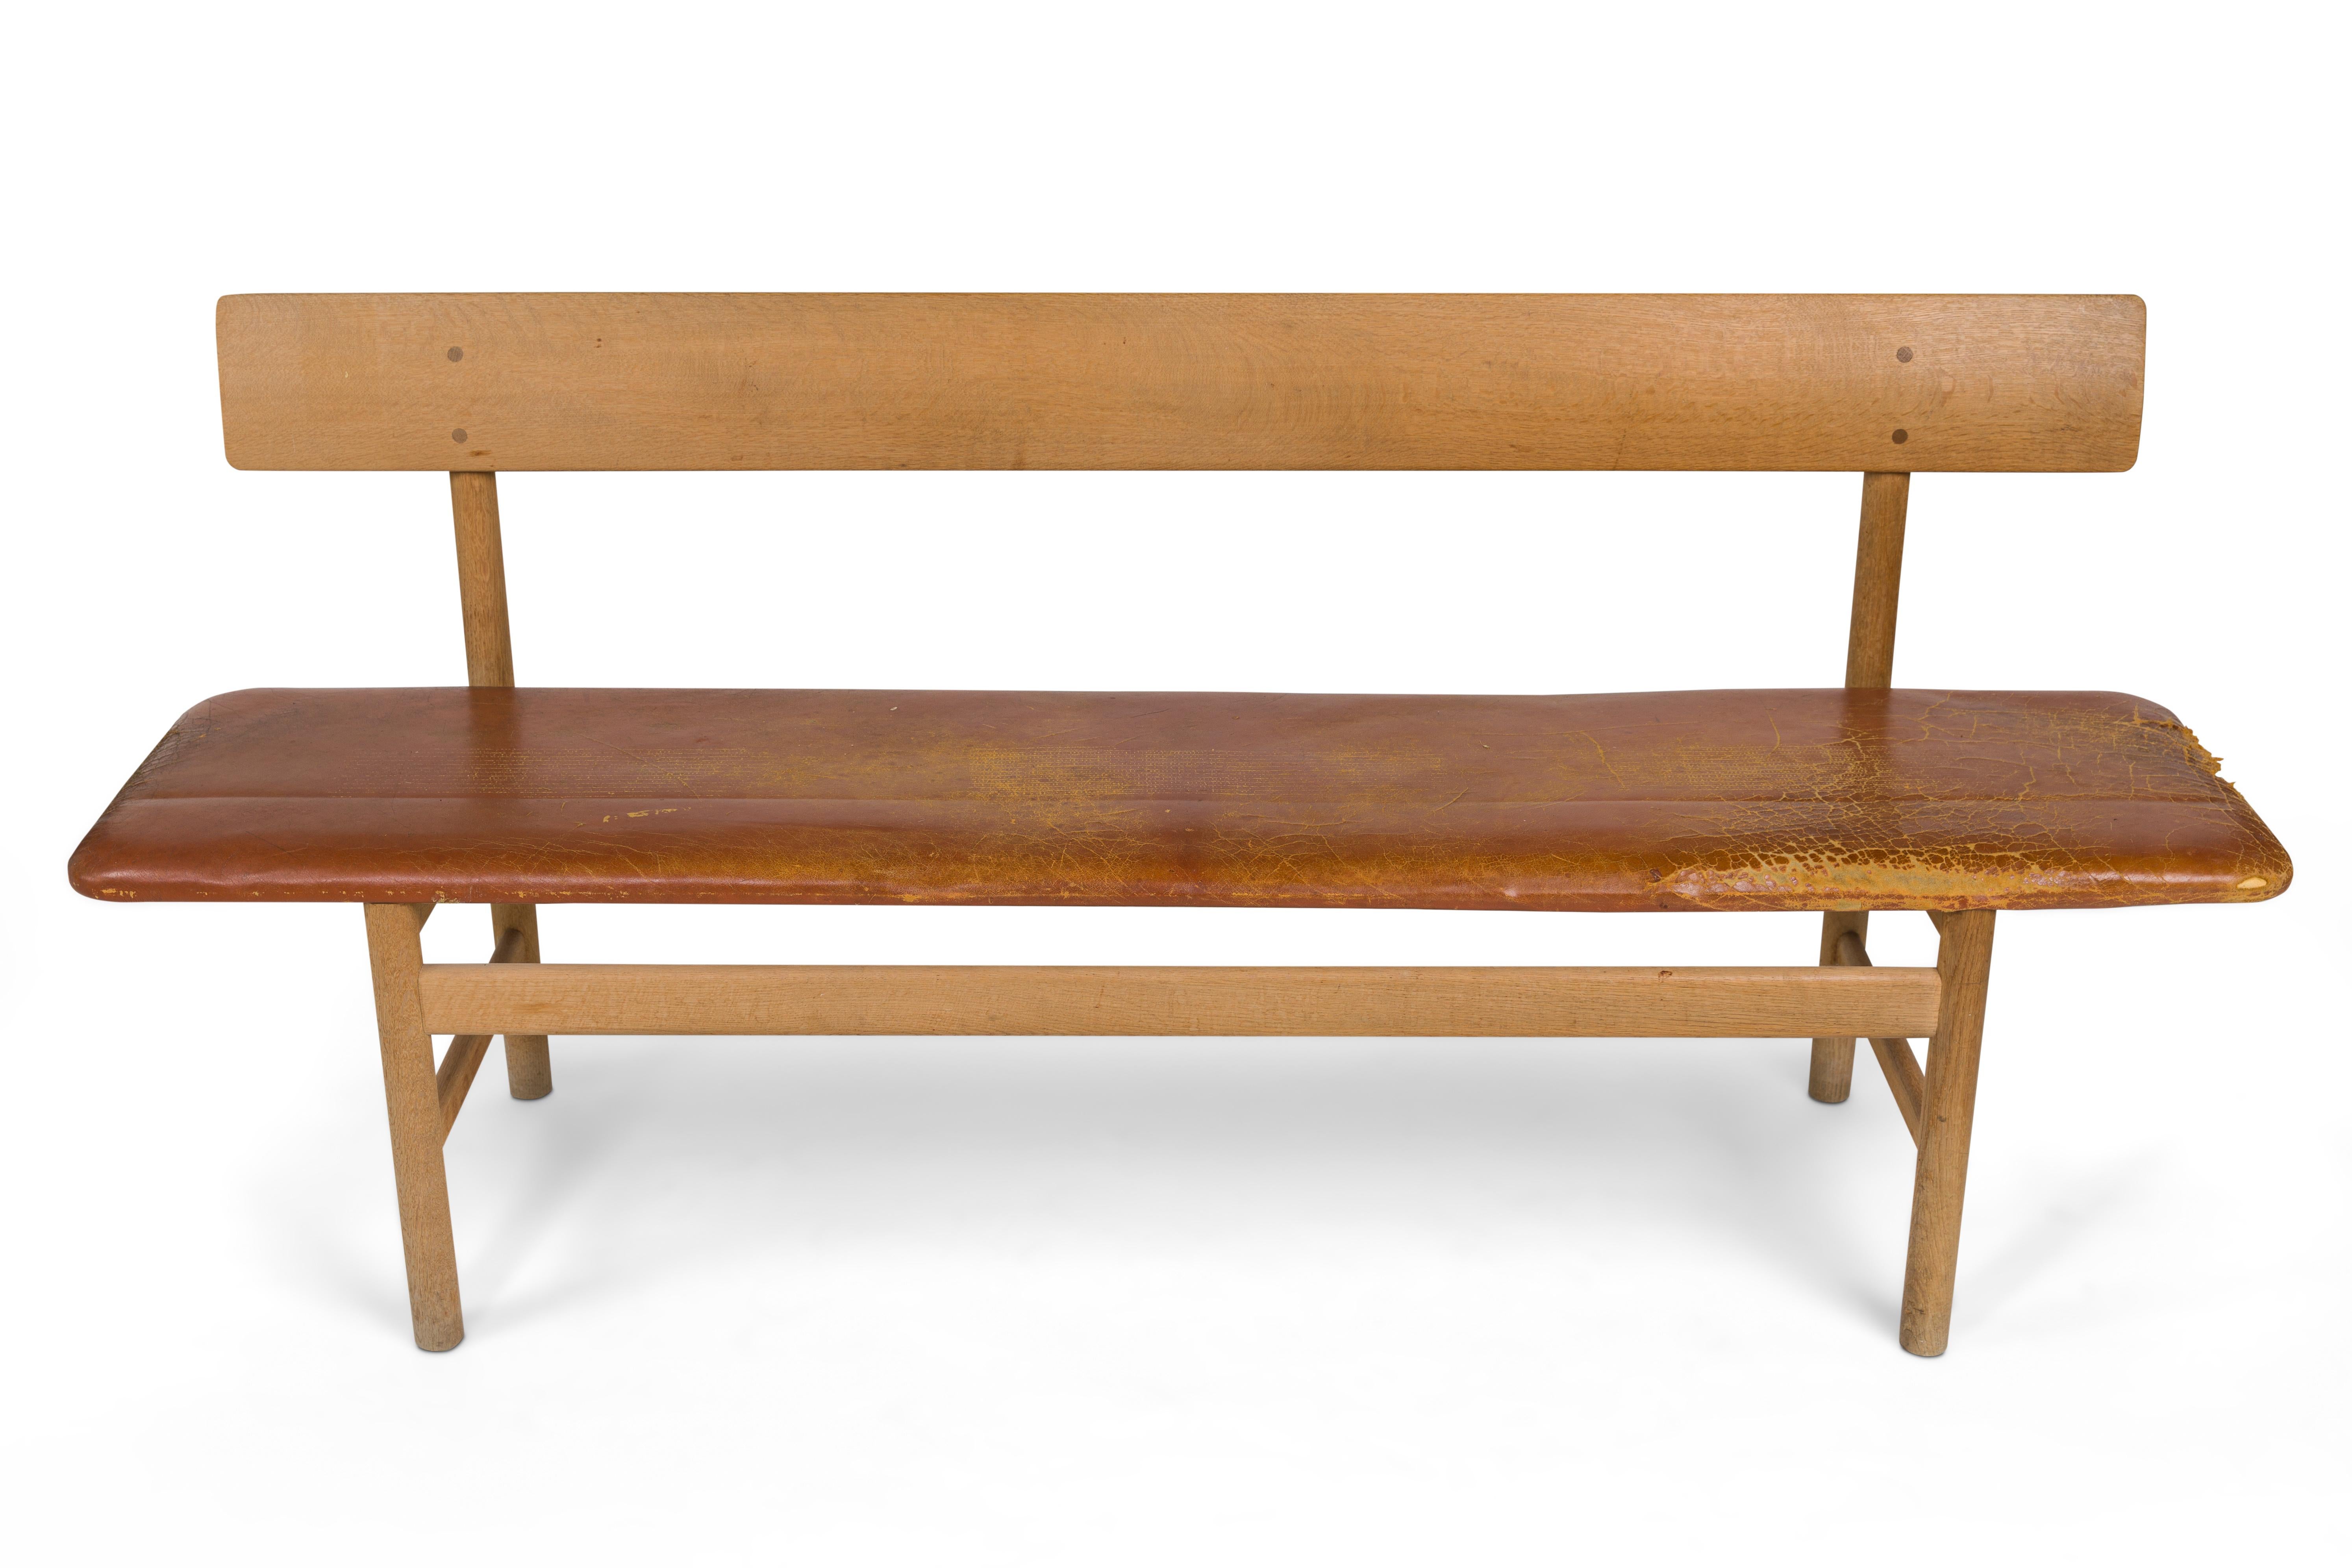 Seat/bench model 3171 designed by Børge Mogensen, manufactured by Fredericia Møbelfabrik.
Designed 1956. Oak design, upholstered leather covering. Marked with remains of the manufacturer's sticker label.
Dimensions: Height approximate 76 cm, width